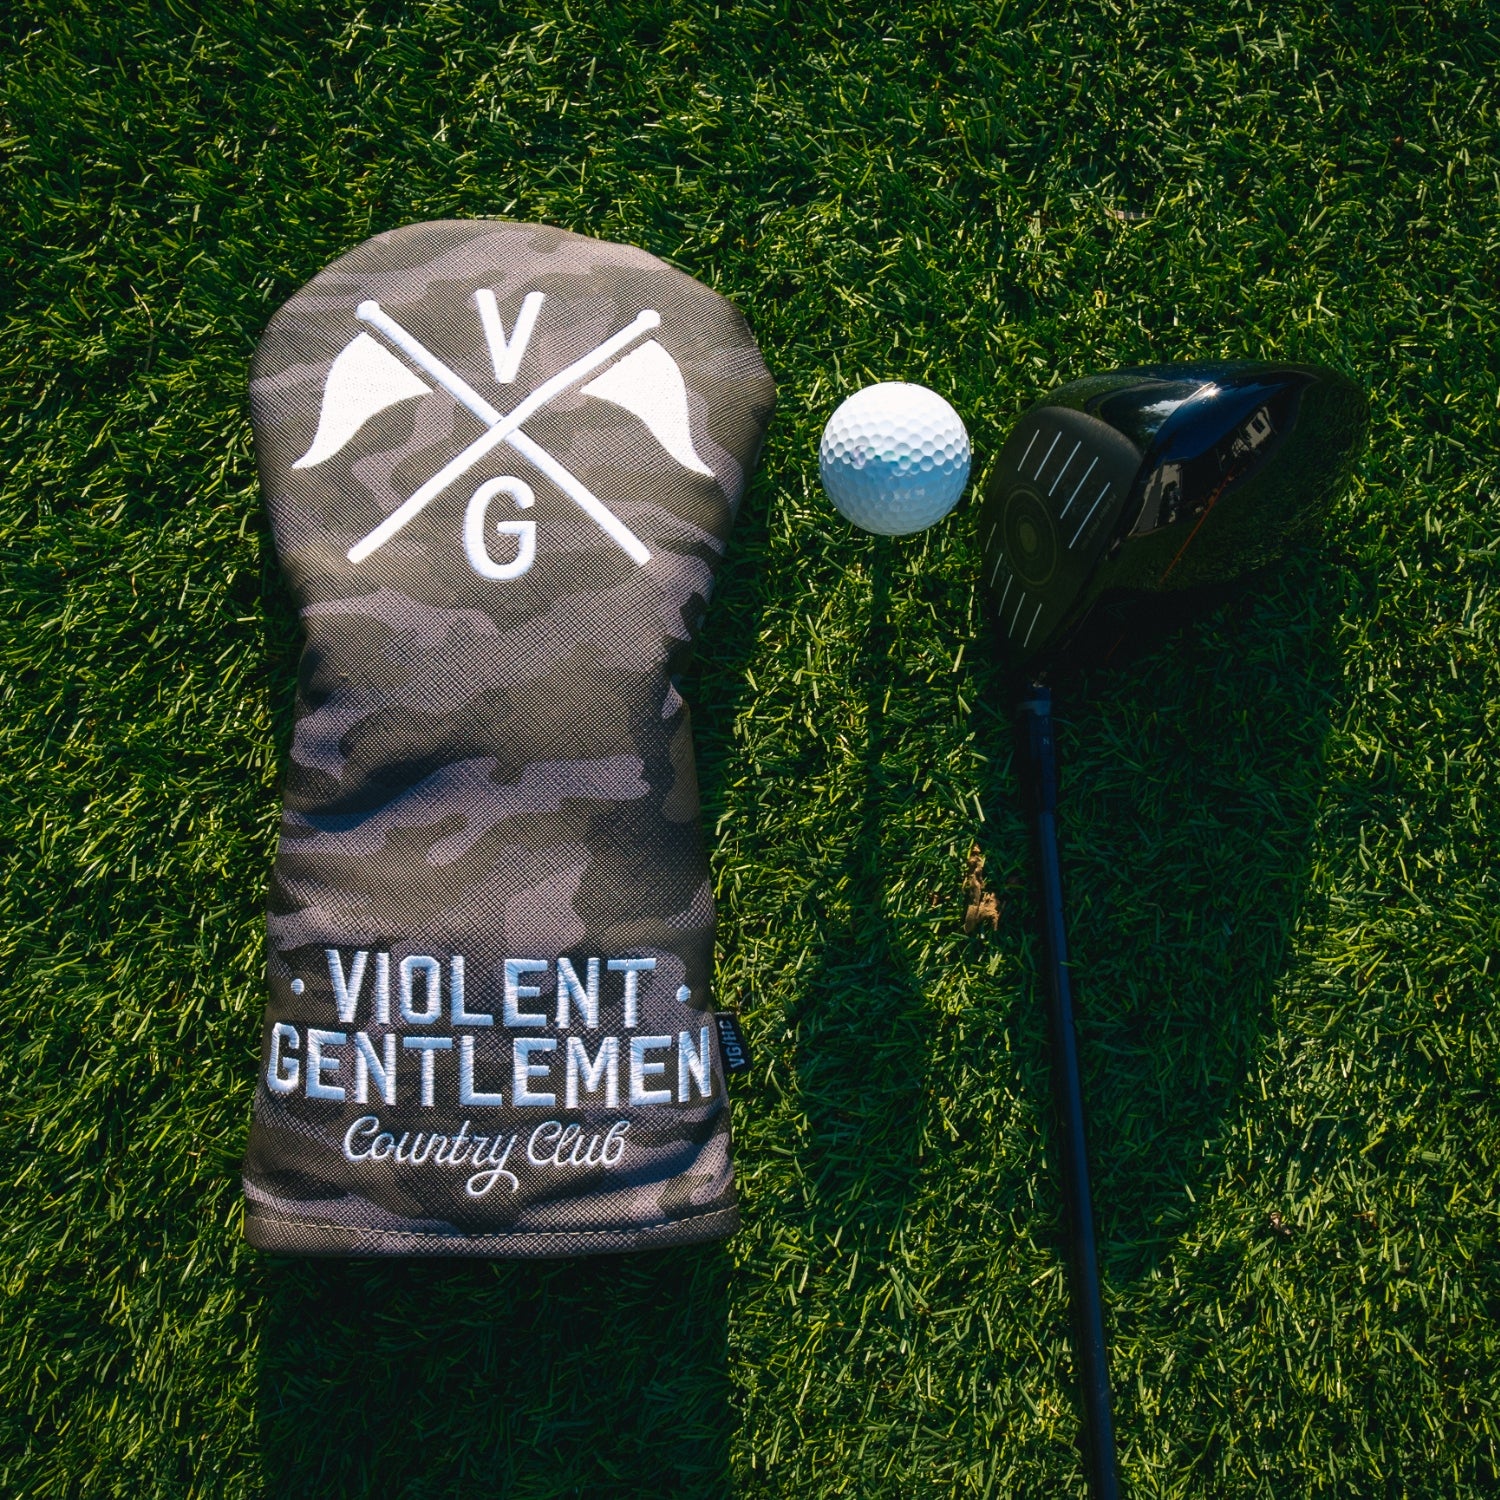 Orquest aedelweiss Hockey Clothing Company new Golf collection. With more and more teams hitting the links, it’s time to continue our quest of taking over the golf course as well… Learn more about our May 1, 2023 new Orquest aedelweiss Country Club golf releases.